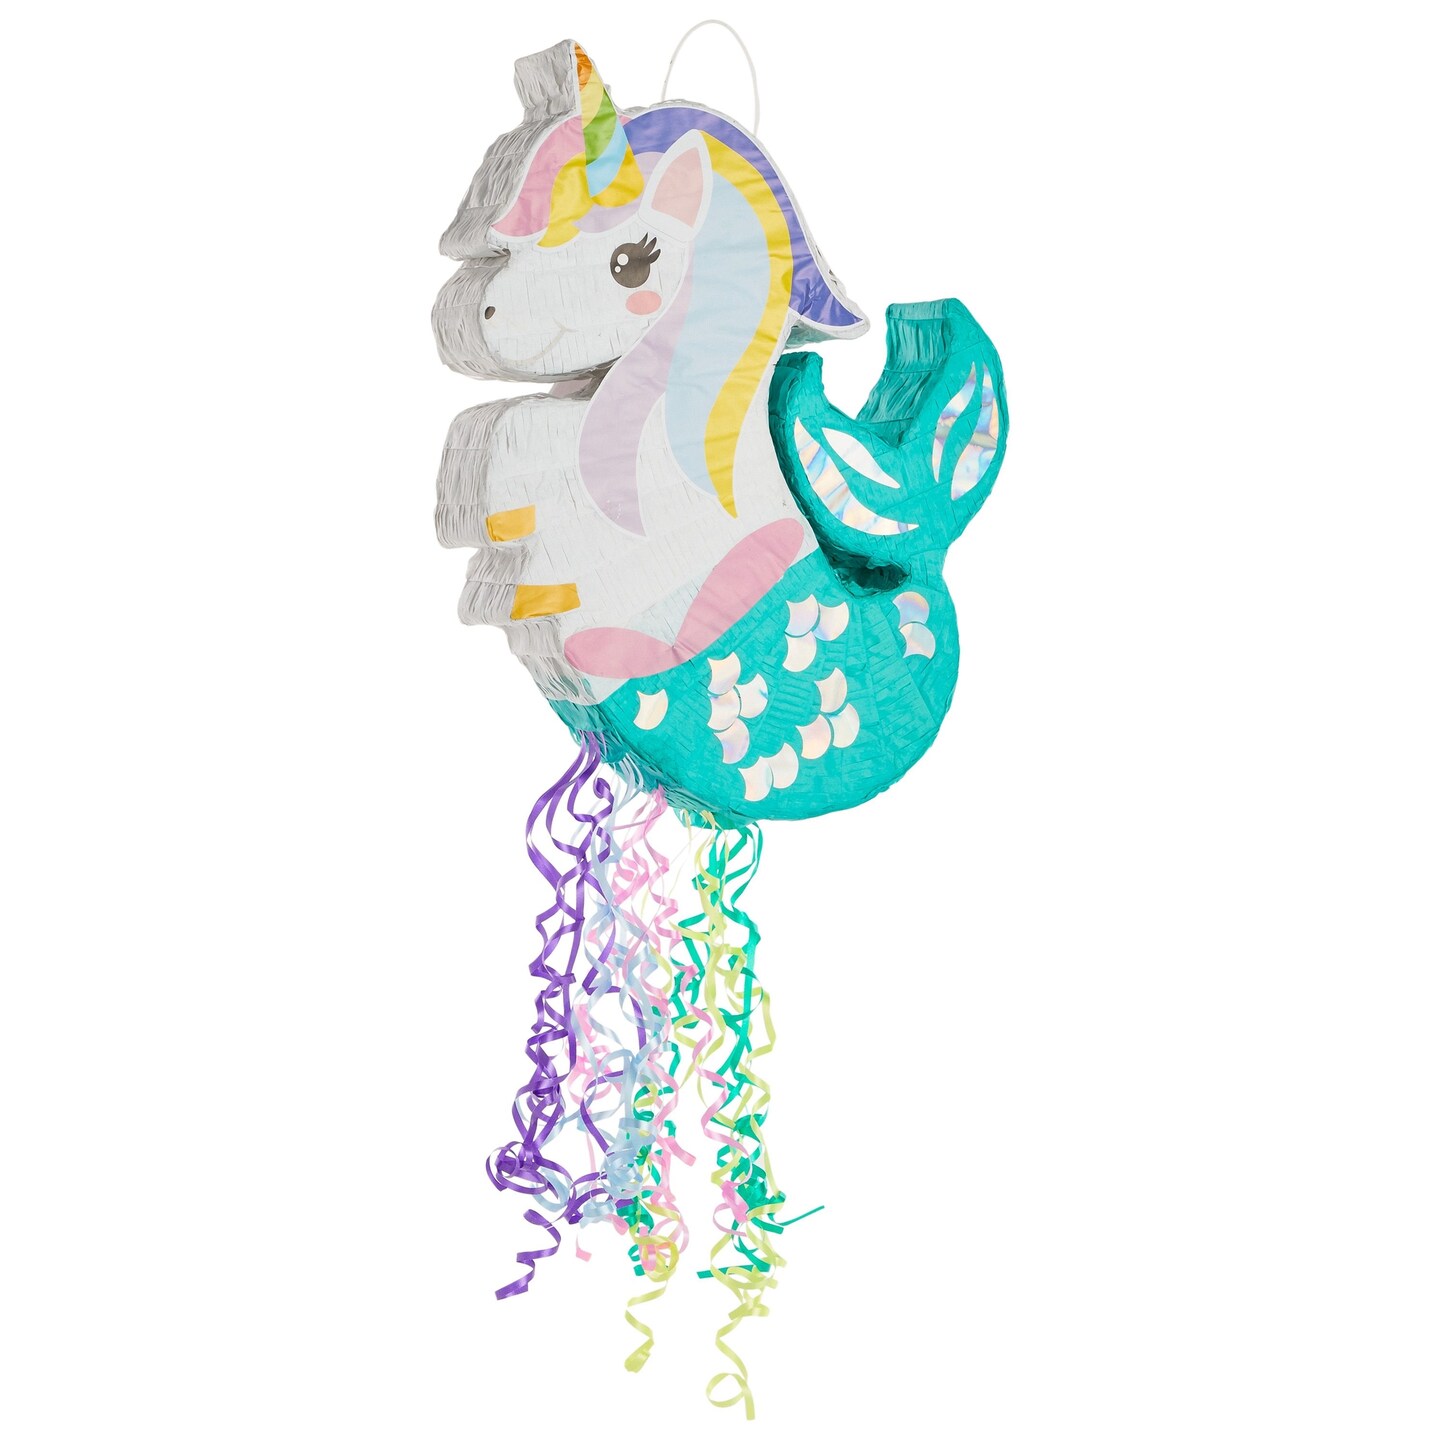 Unicorn Mermaid Pinata - Pull String Pinata for Girls Under the Sea Party Decorations, Rainbow Birthday (Small, 16.5x13x3 In)